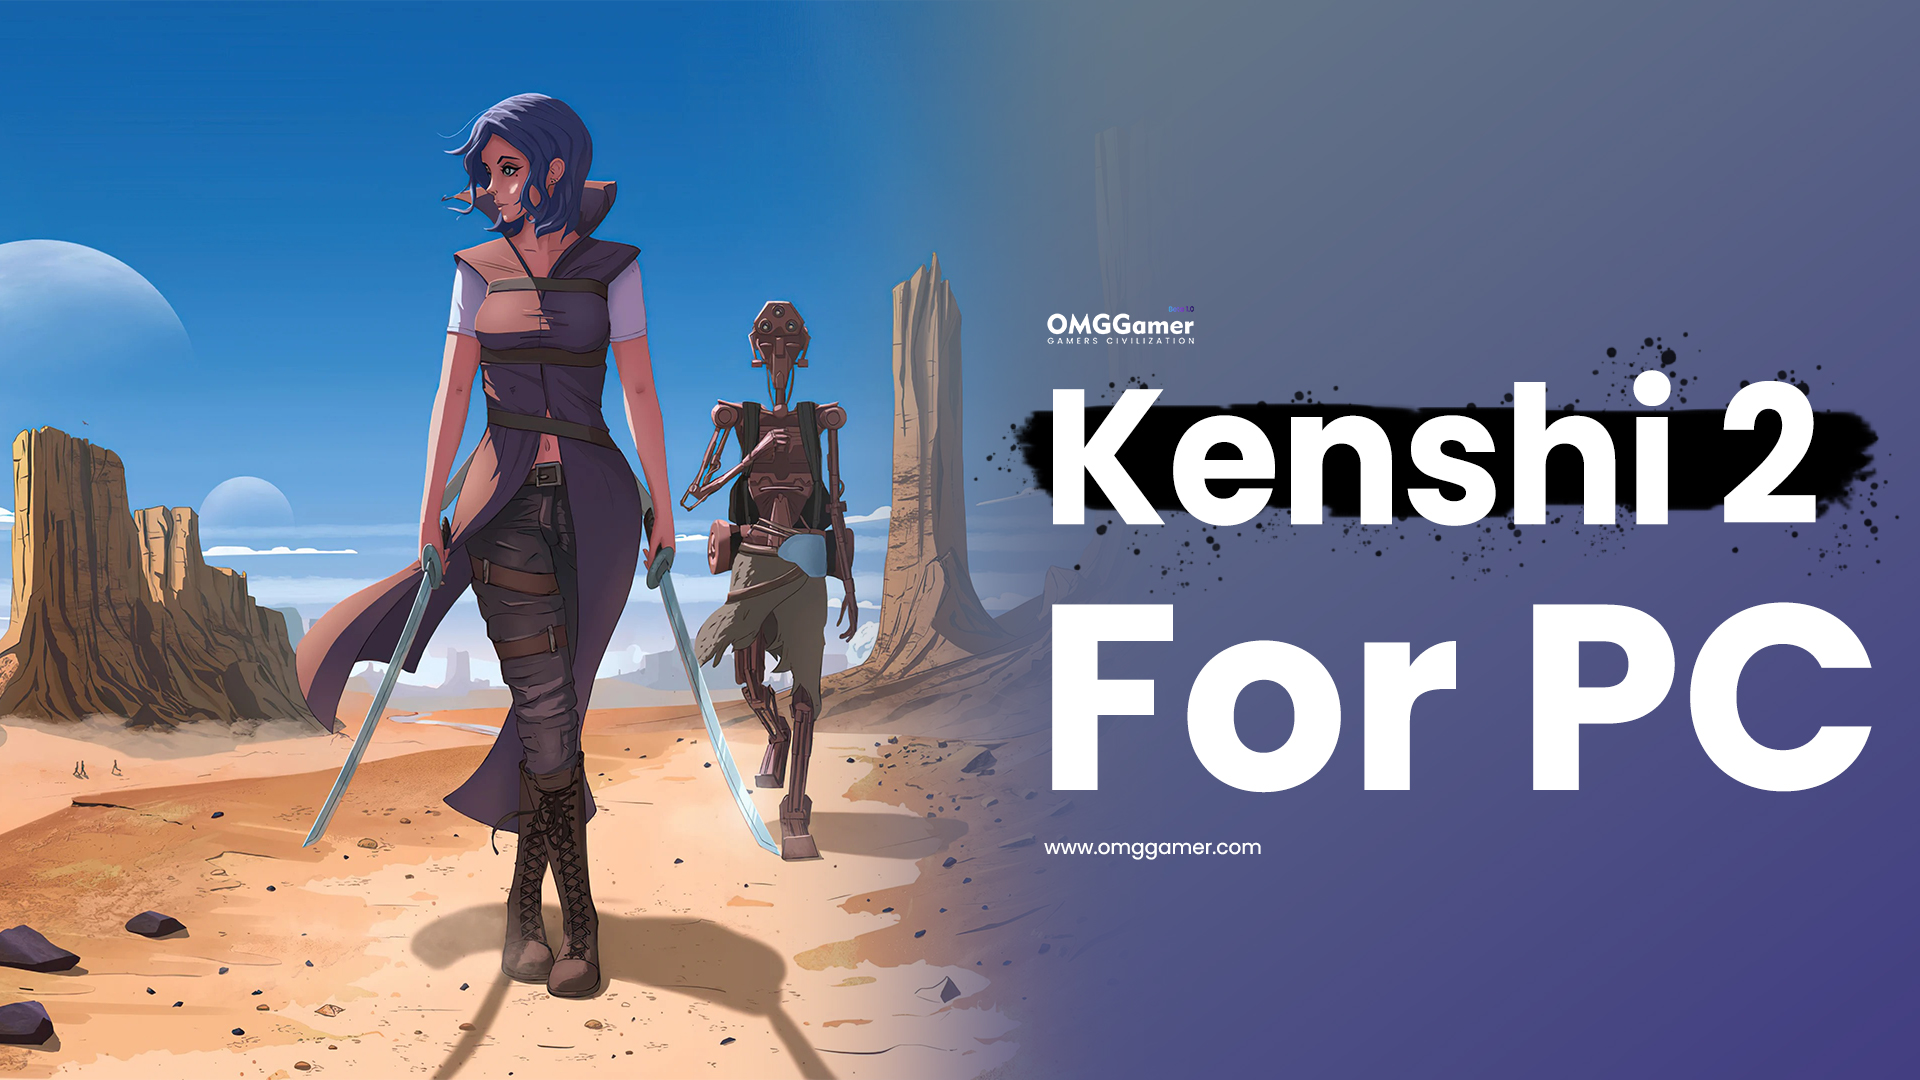 Kenshi 2 for PC